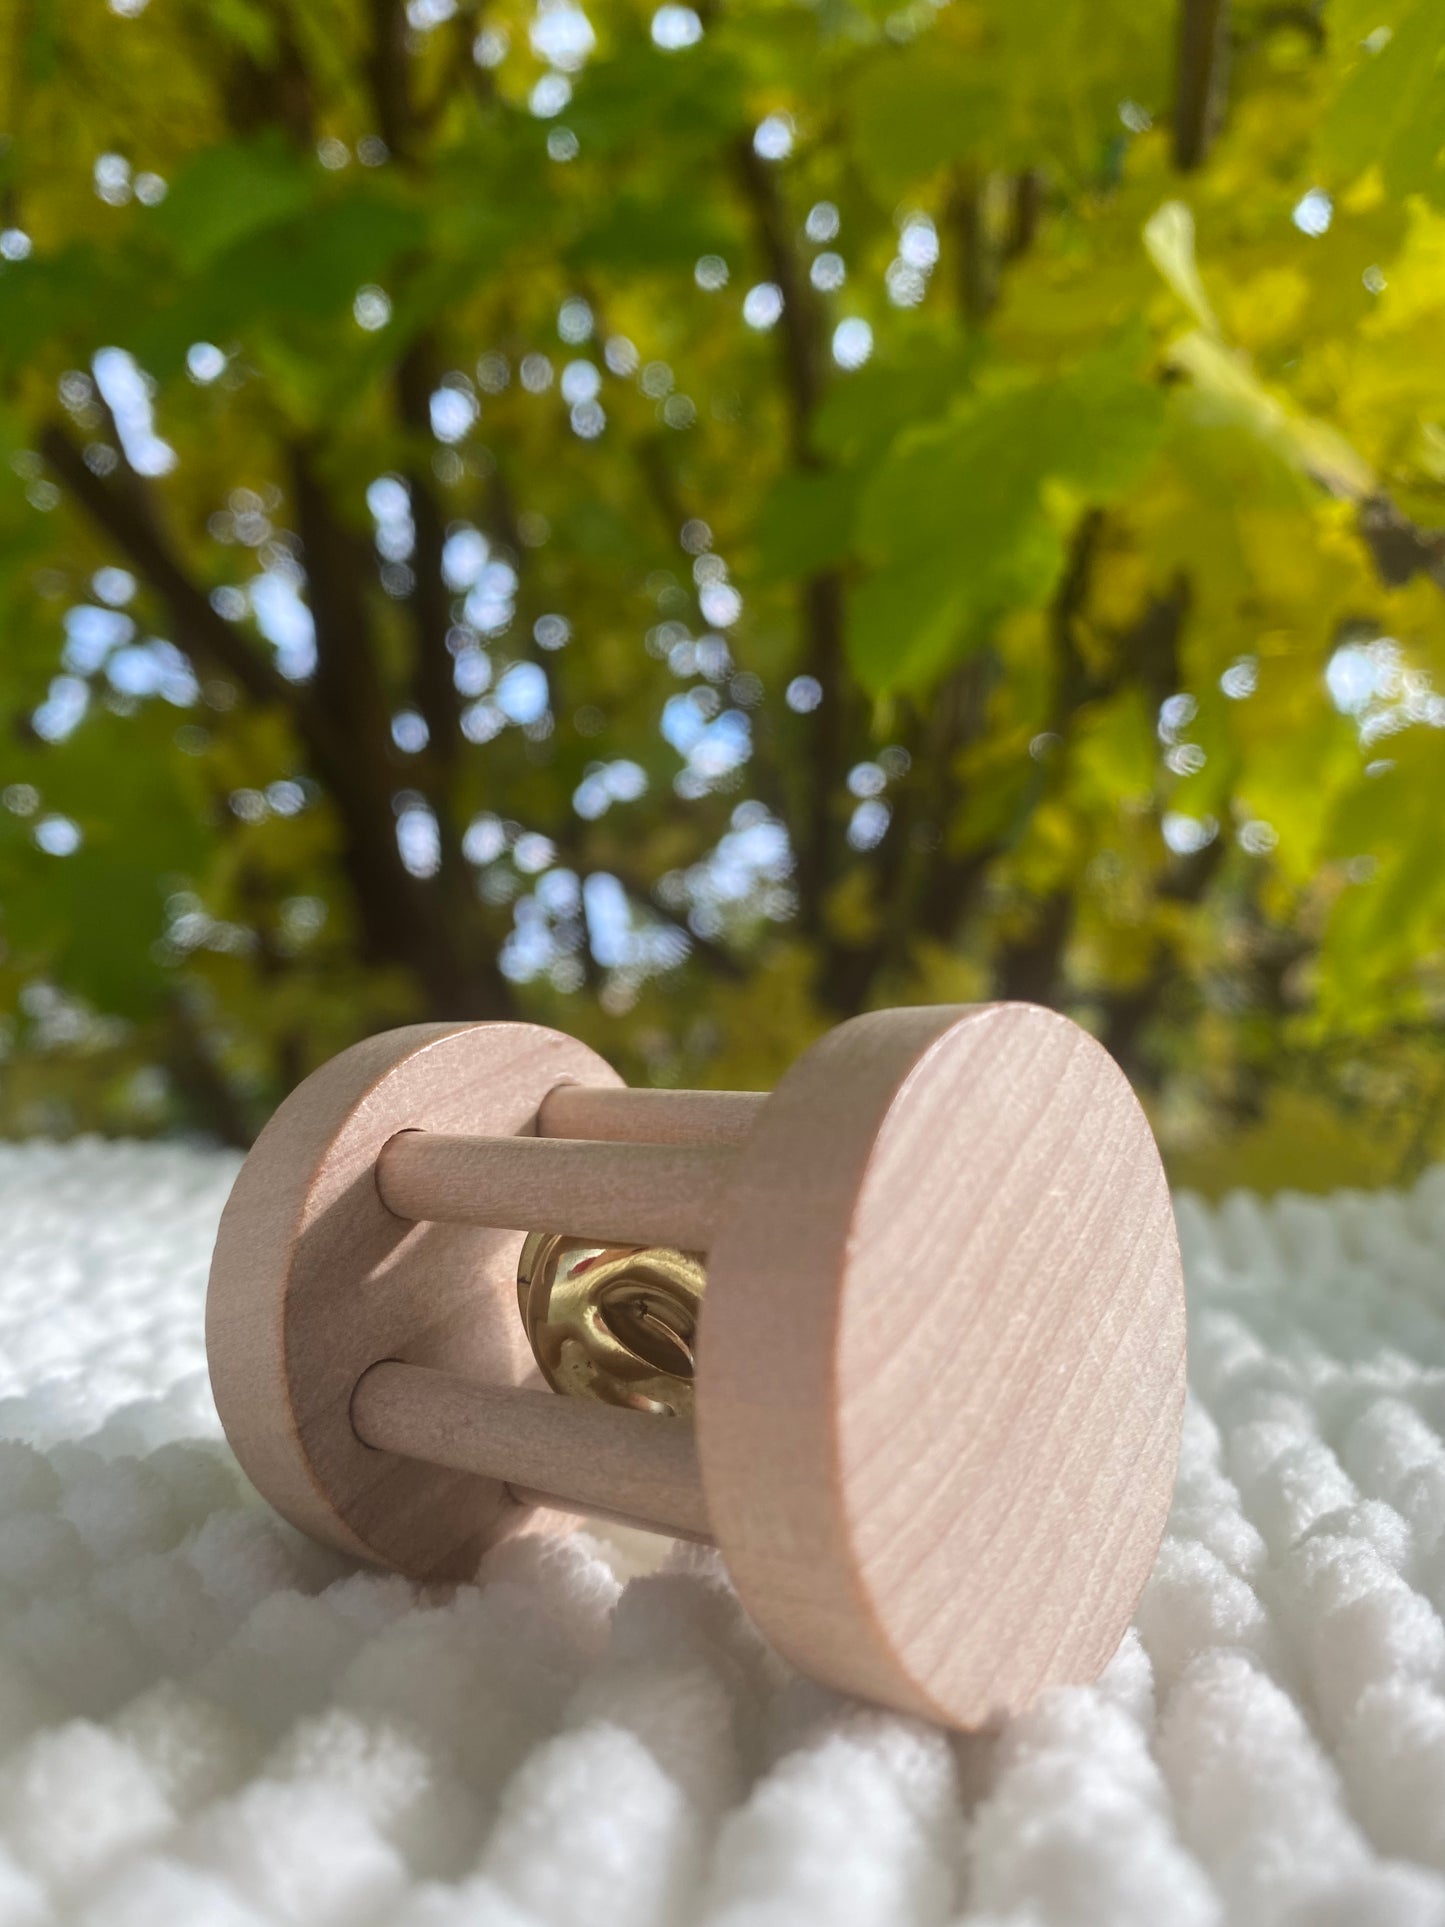 Wheel with bell (toy)